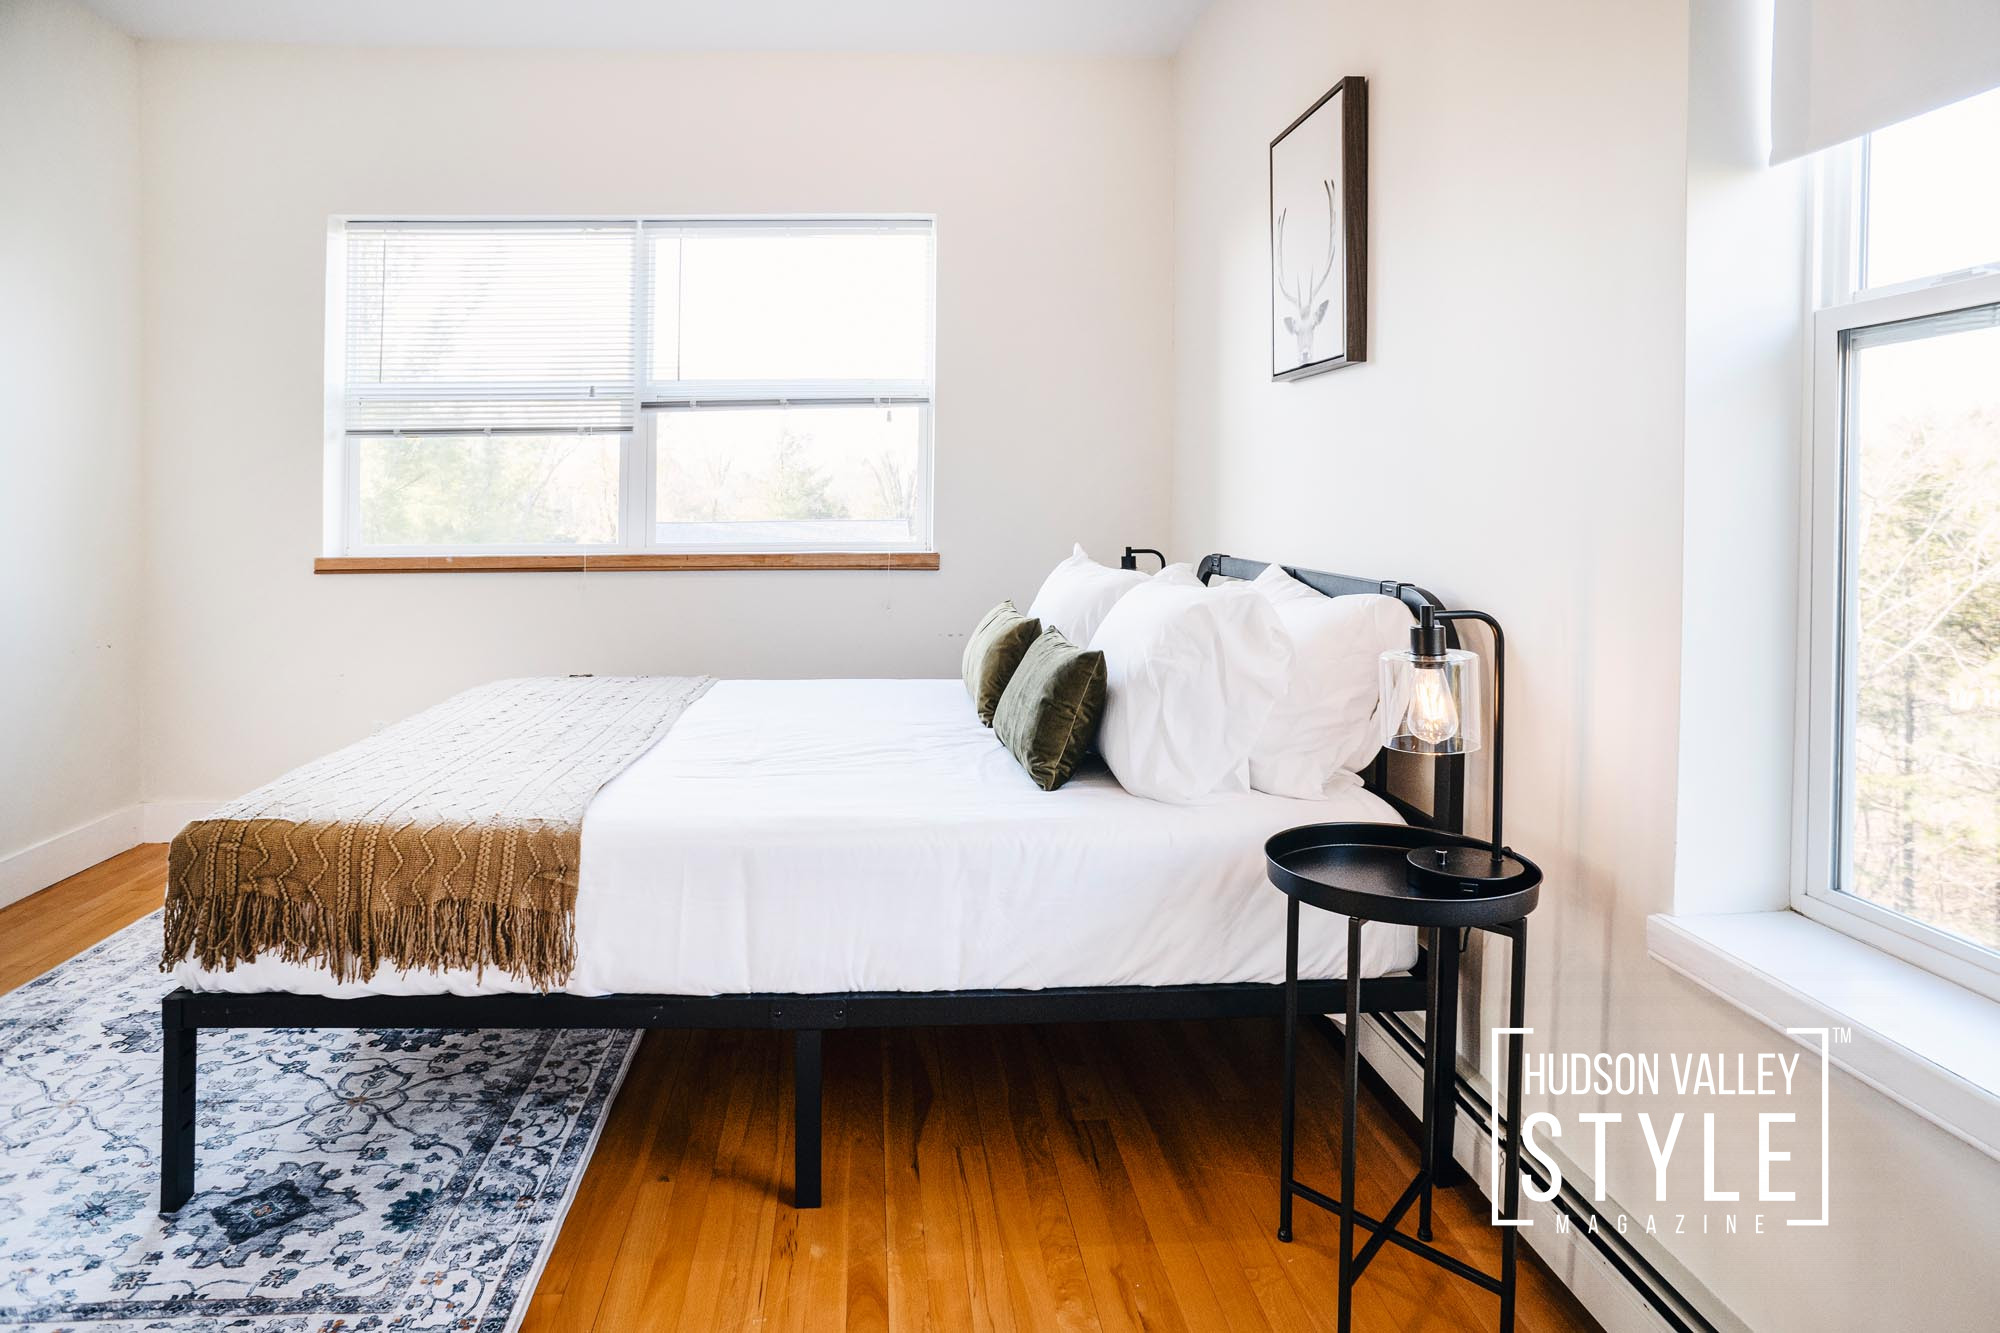 Discover Hudson Valley with Morning Wood – Sunny Catskills Airbnb Cottage near Hudson, NY – Photography by Maxwell Alexander / ALLUVION MEDIA